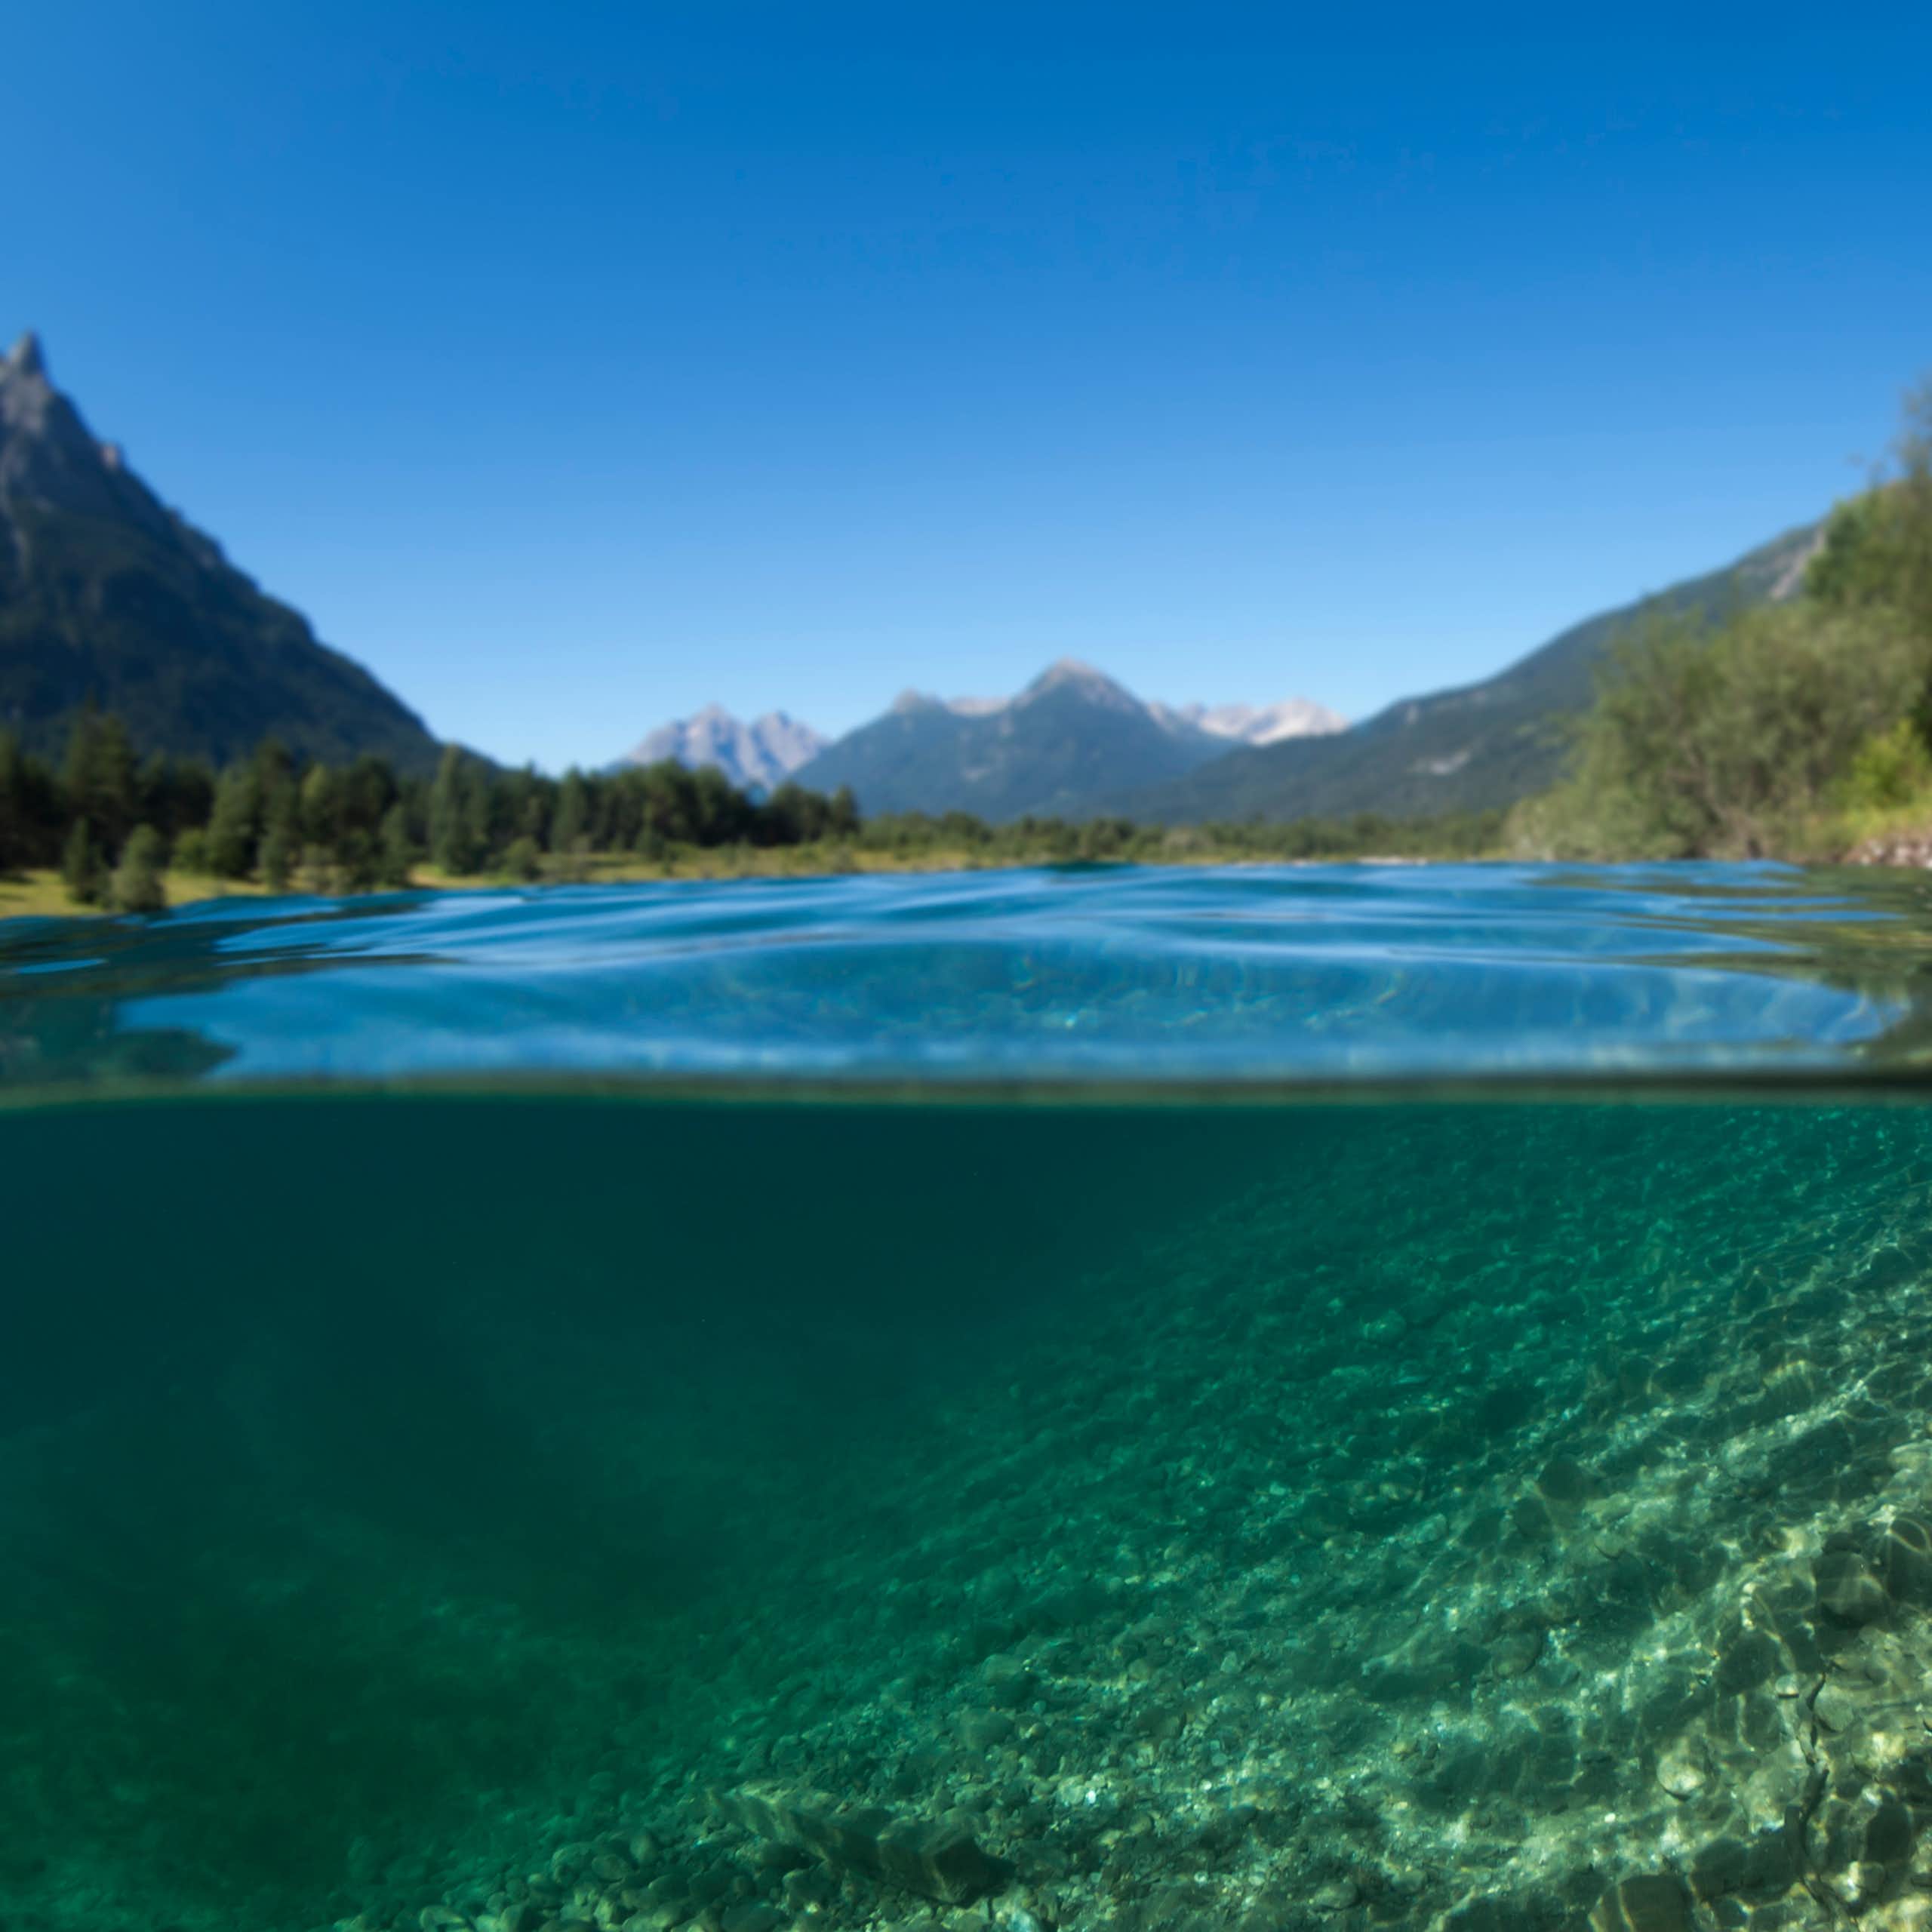 a lake underwater with shores and mountains in the background